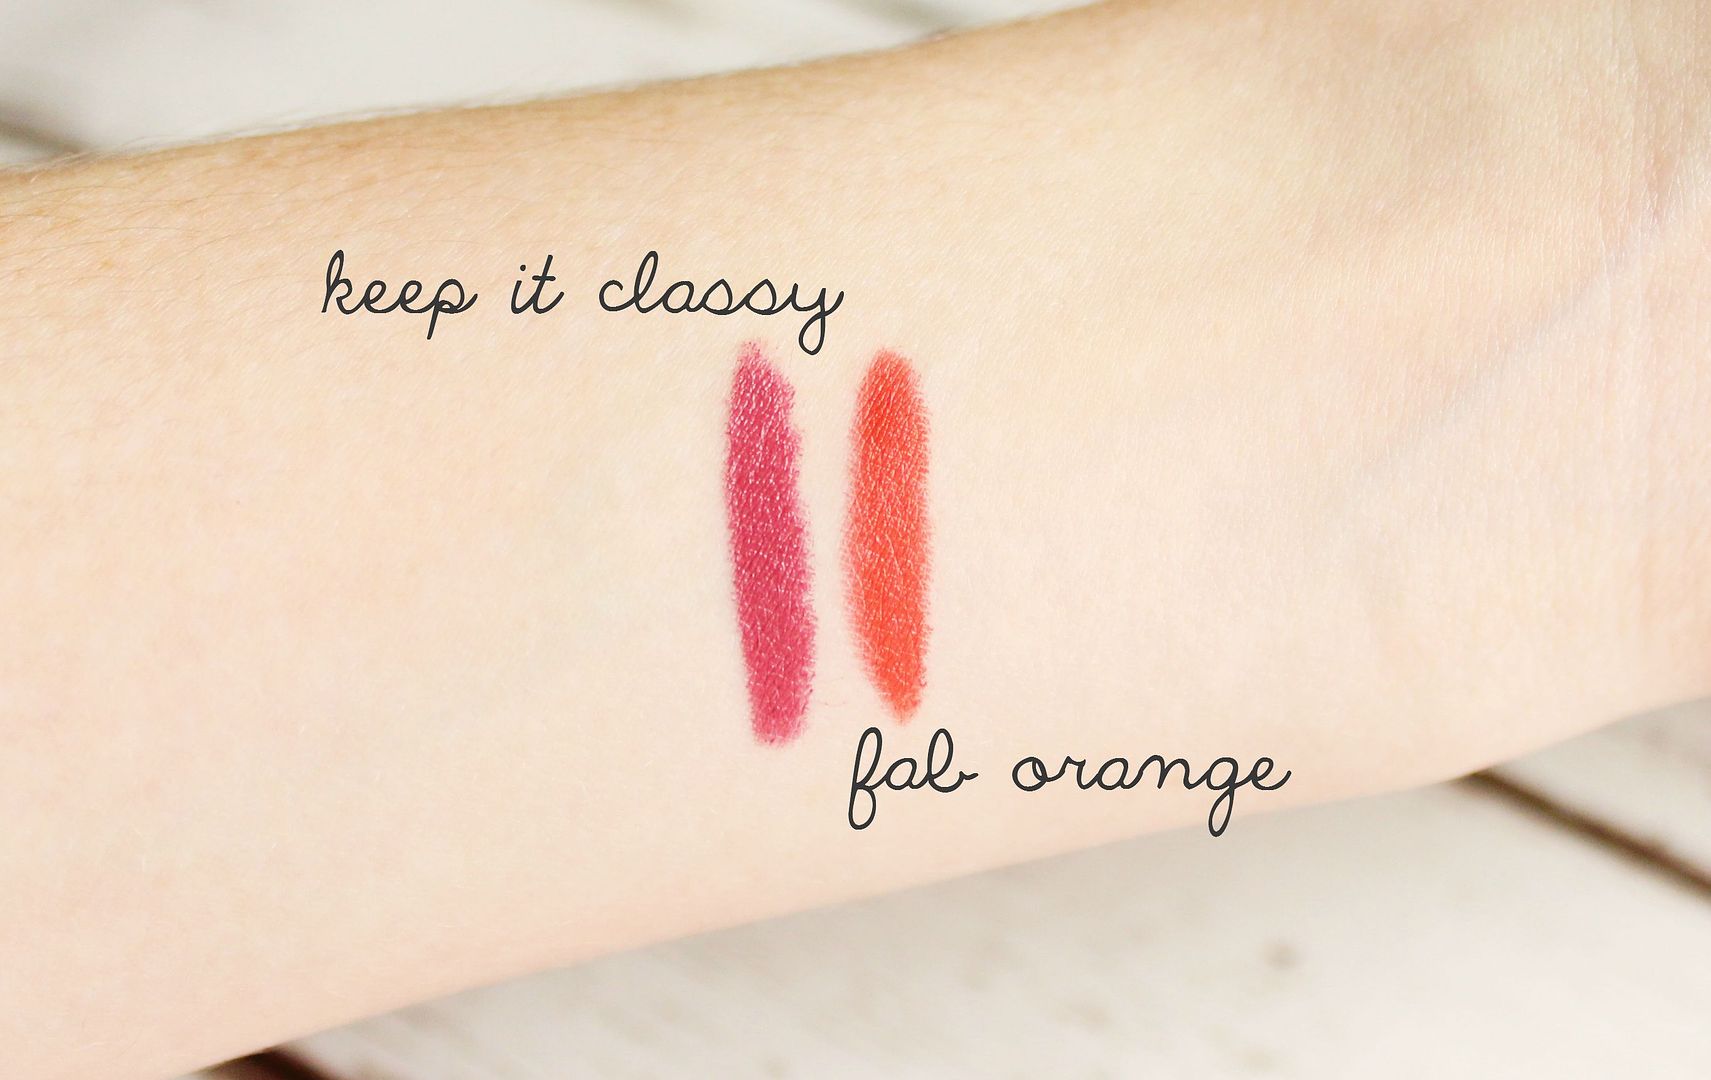 Maybelline Color Drama Lipstick Lip Pencils Keep It Classy Fab Orange Review Swatch Belle-amie Beauty Fashion Lifestyle Blog